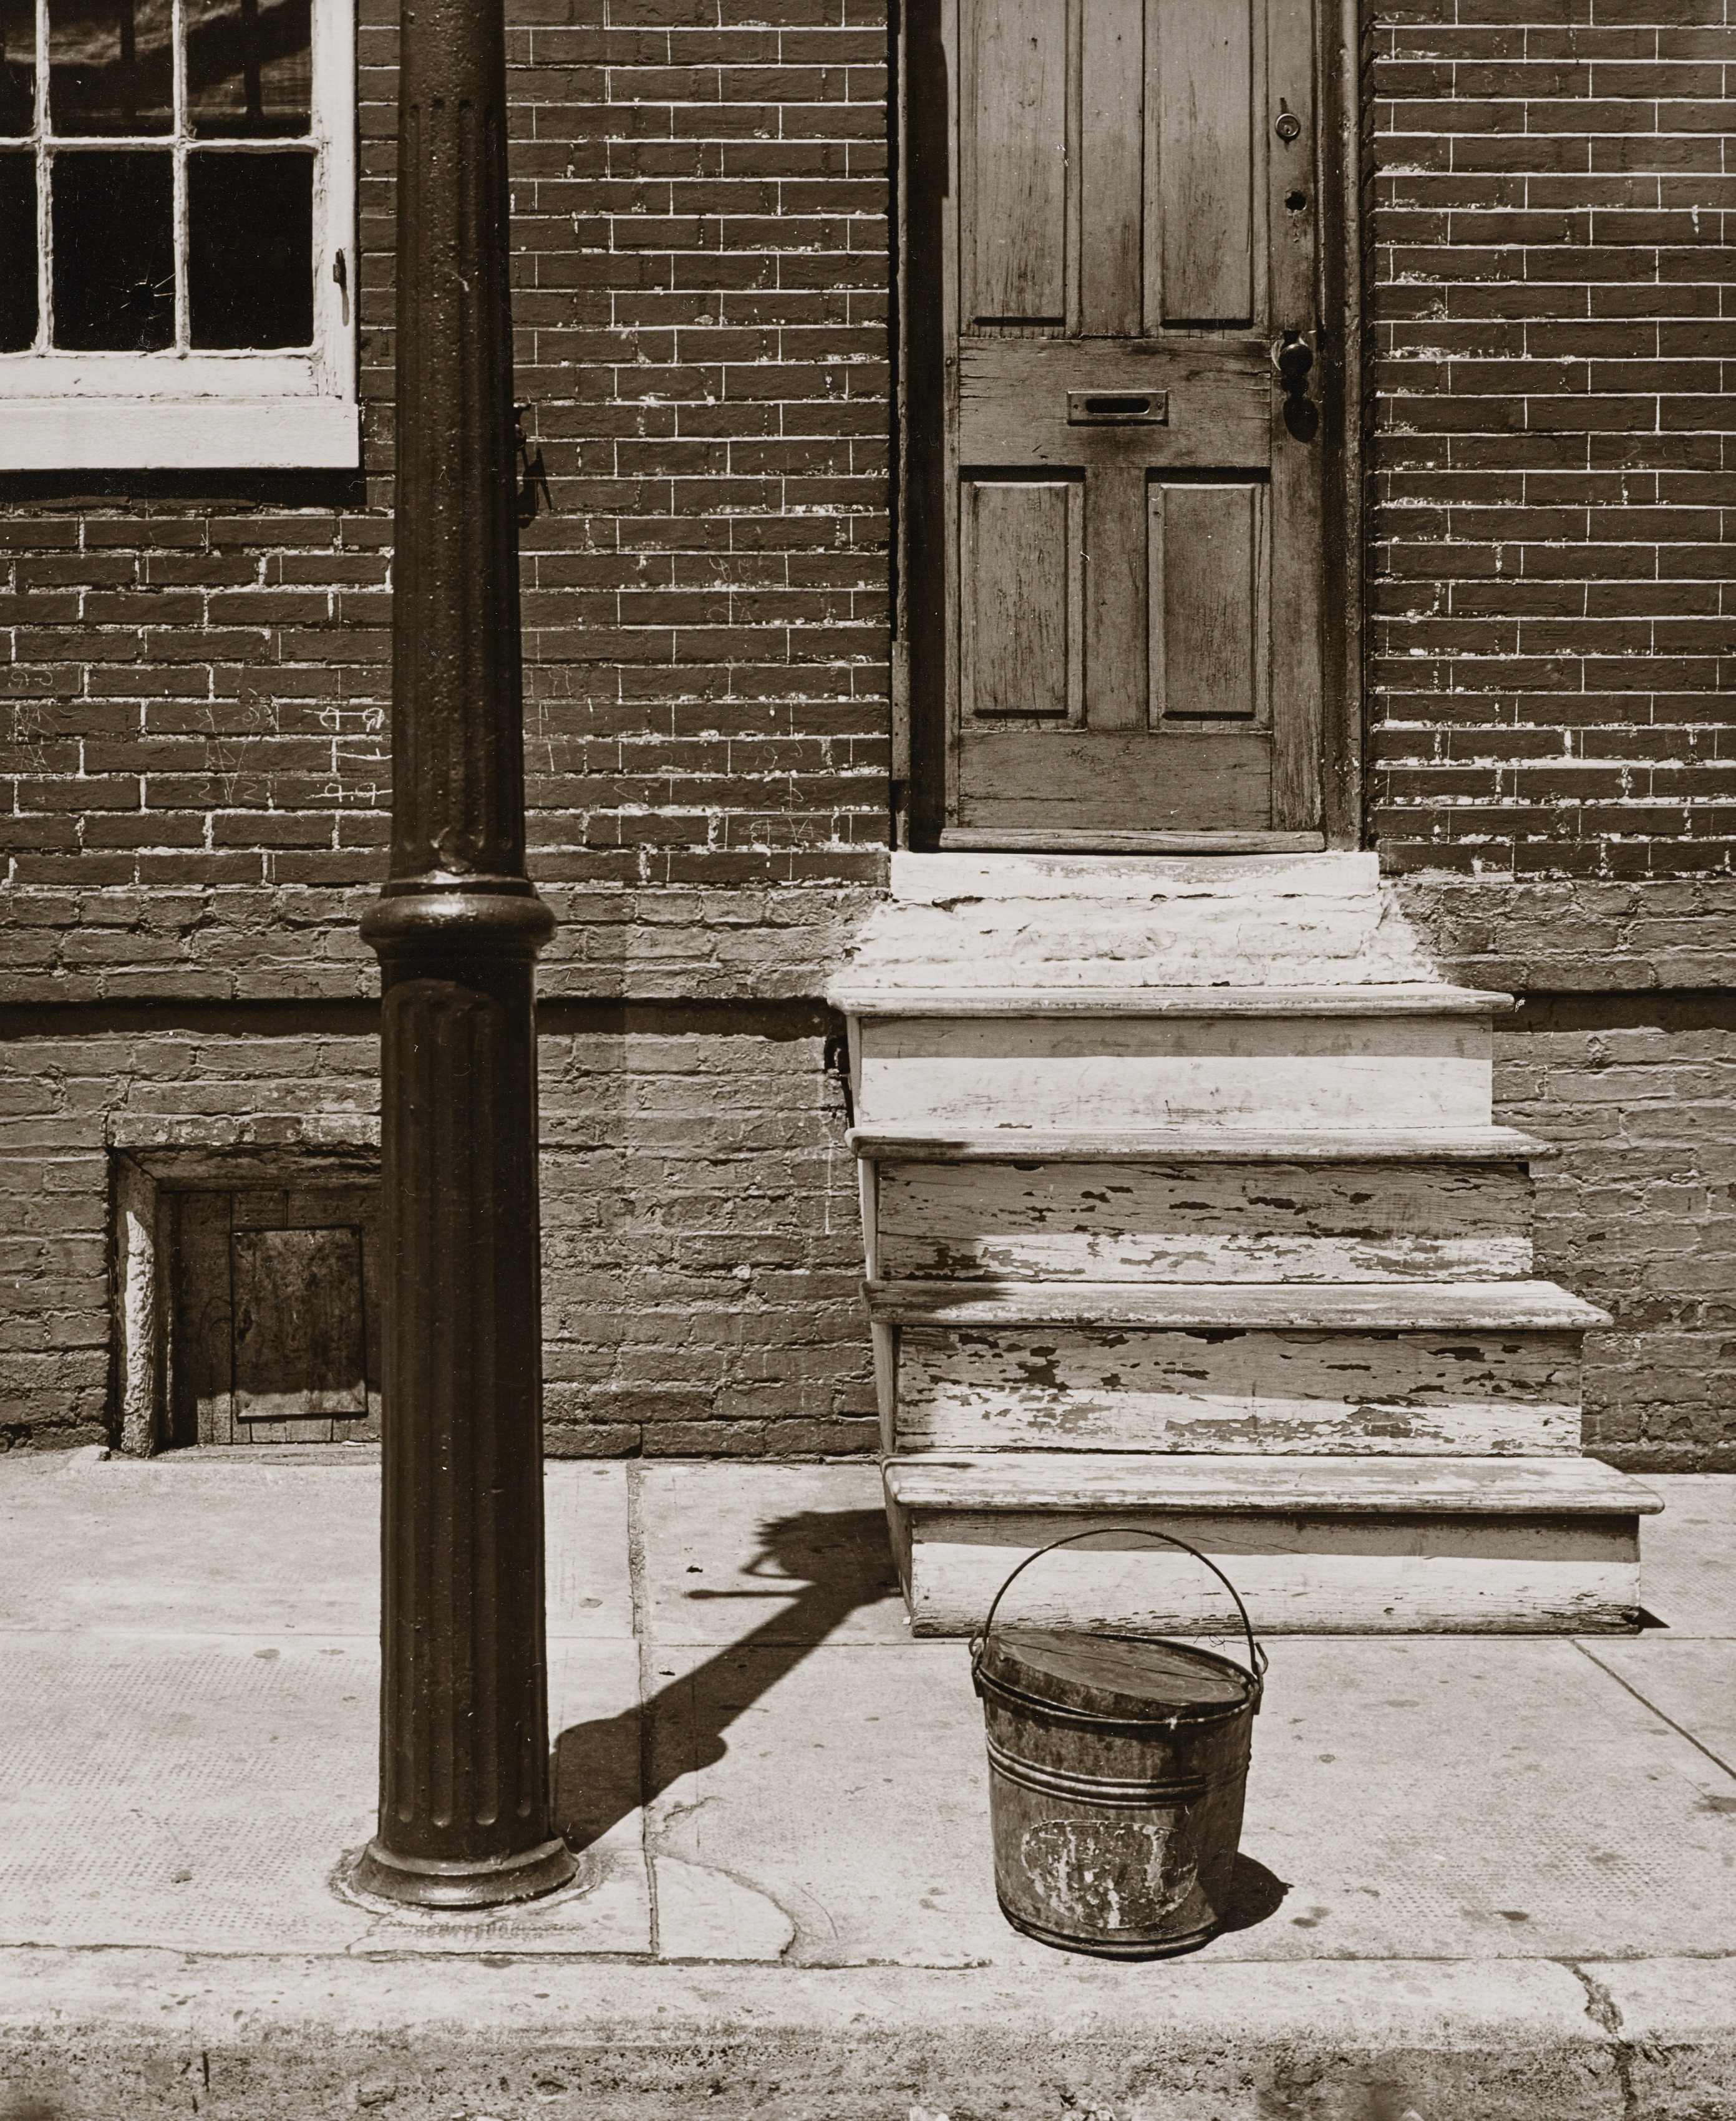 White Steps and Light Pole, Baltimore, MD